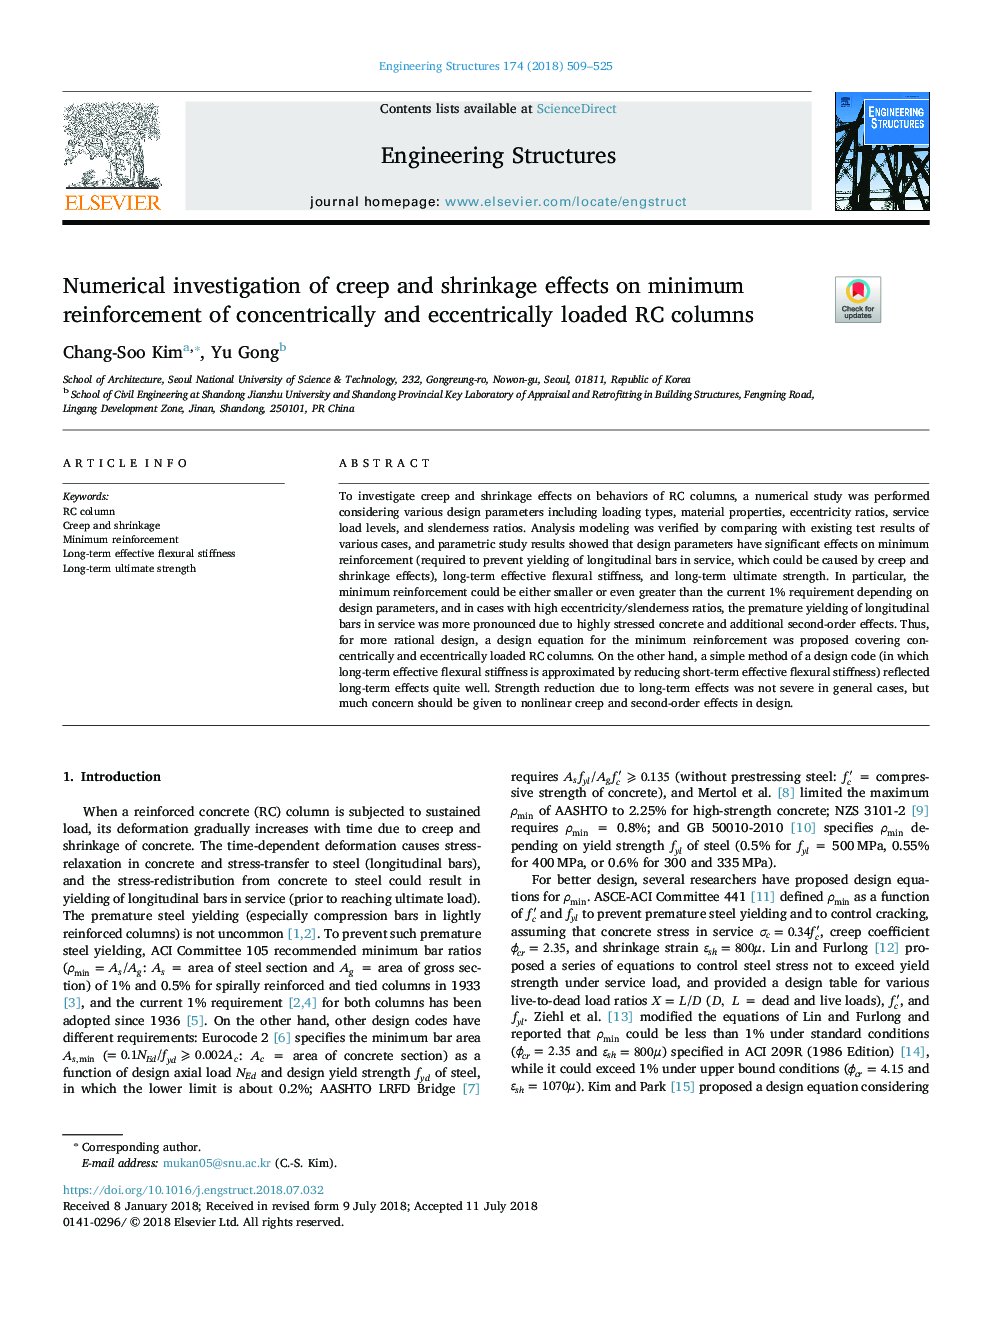 Numerical investigation of creep and shrinkage effects on minimum reinforcement of concentrically and eccentrically loaded RC columns